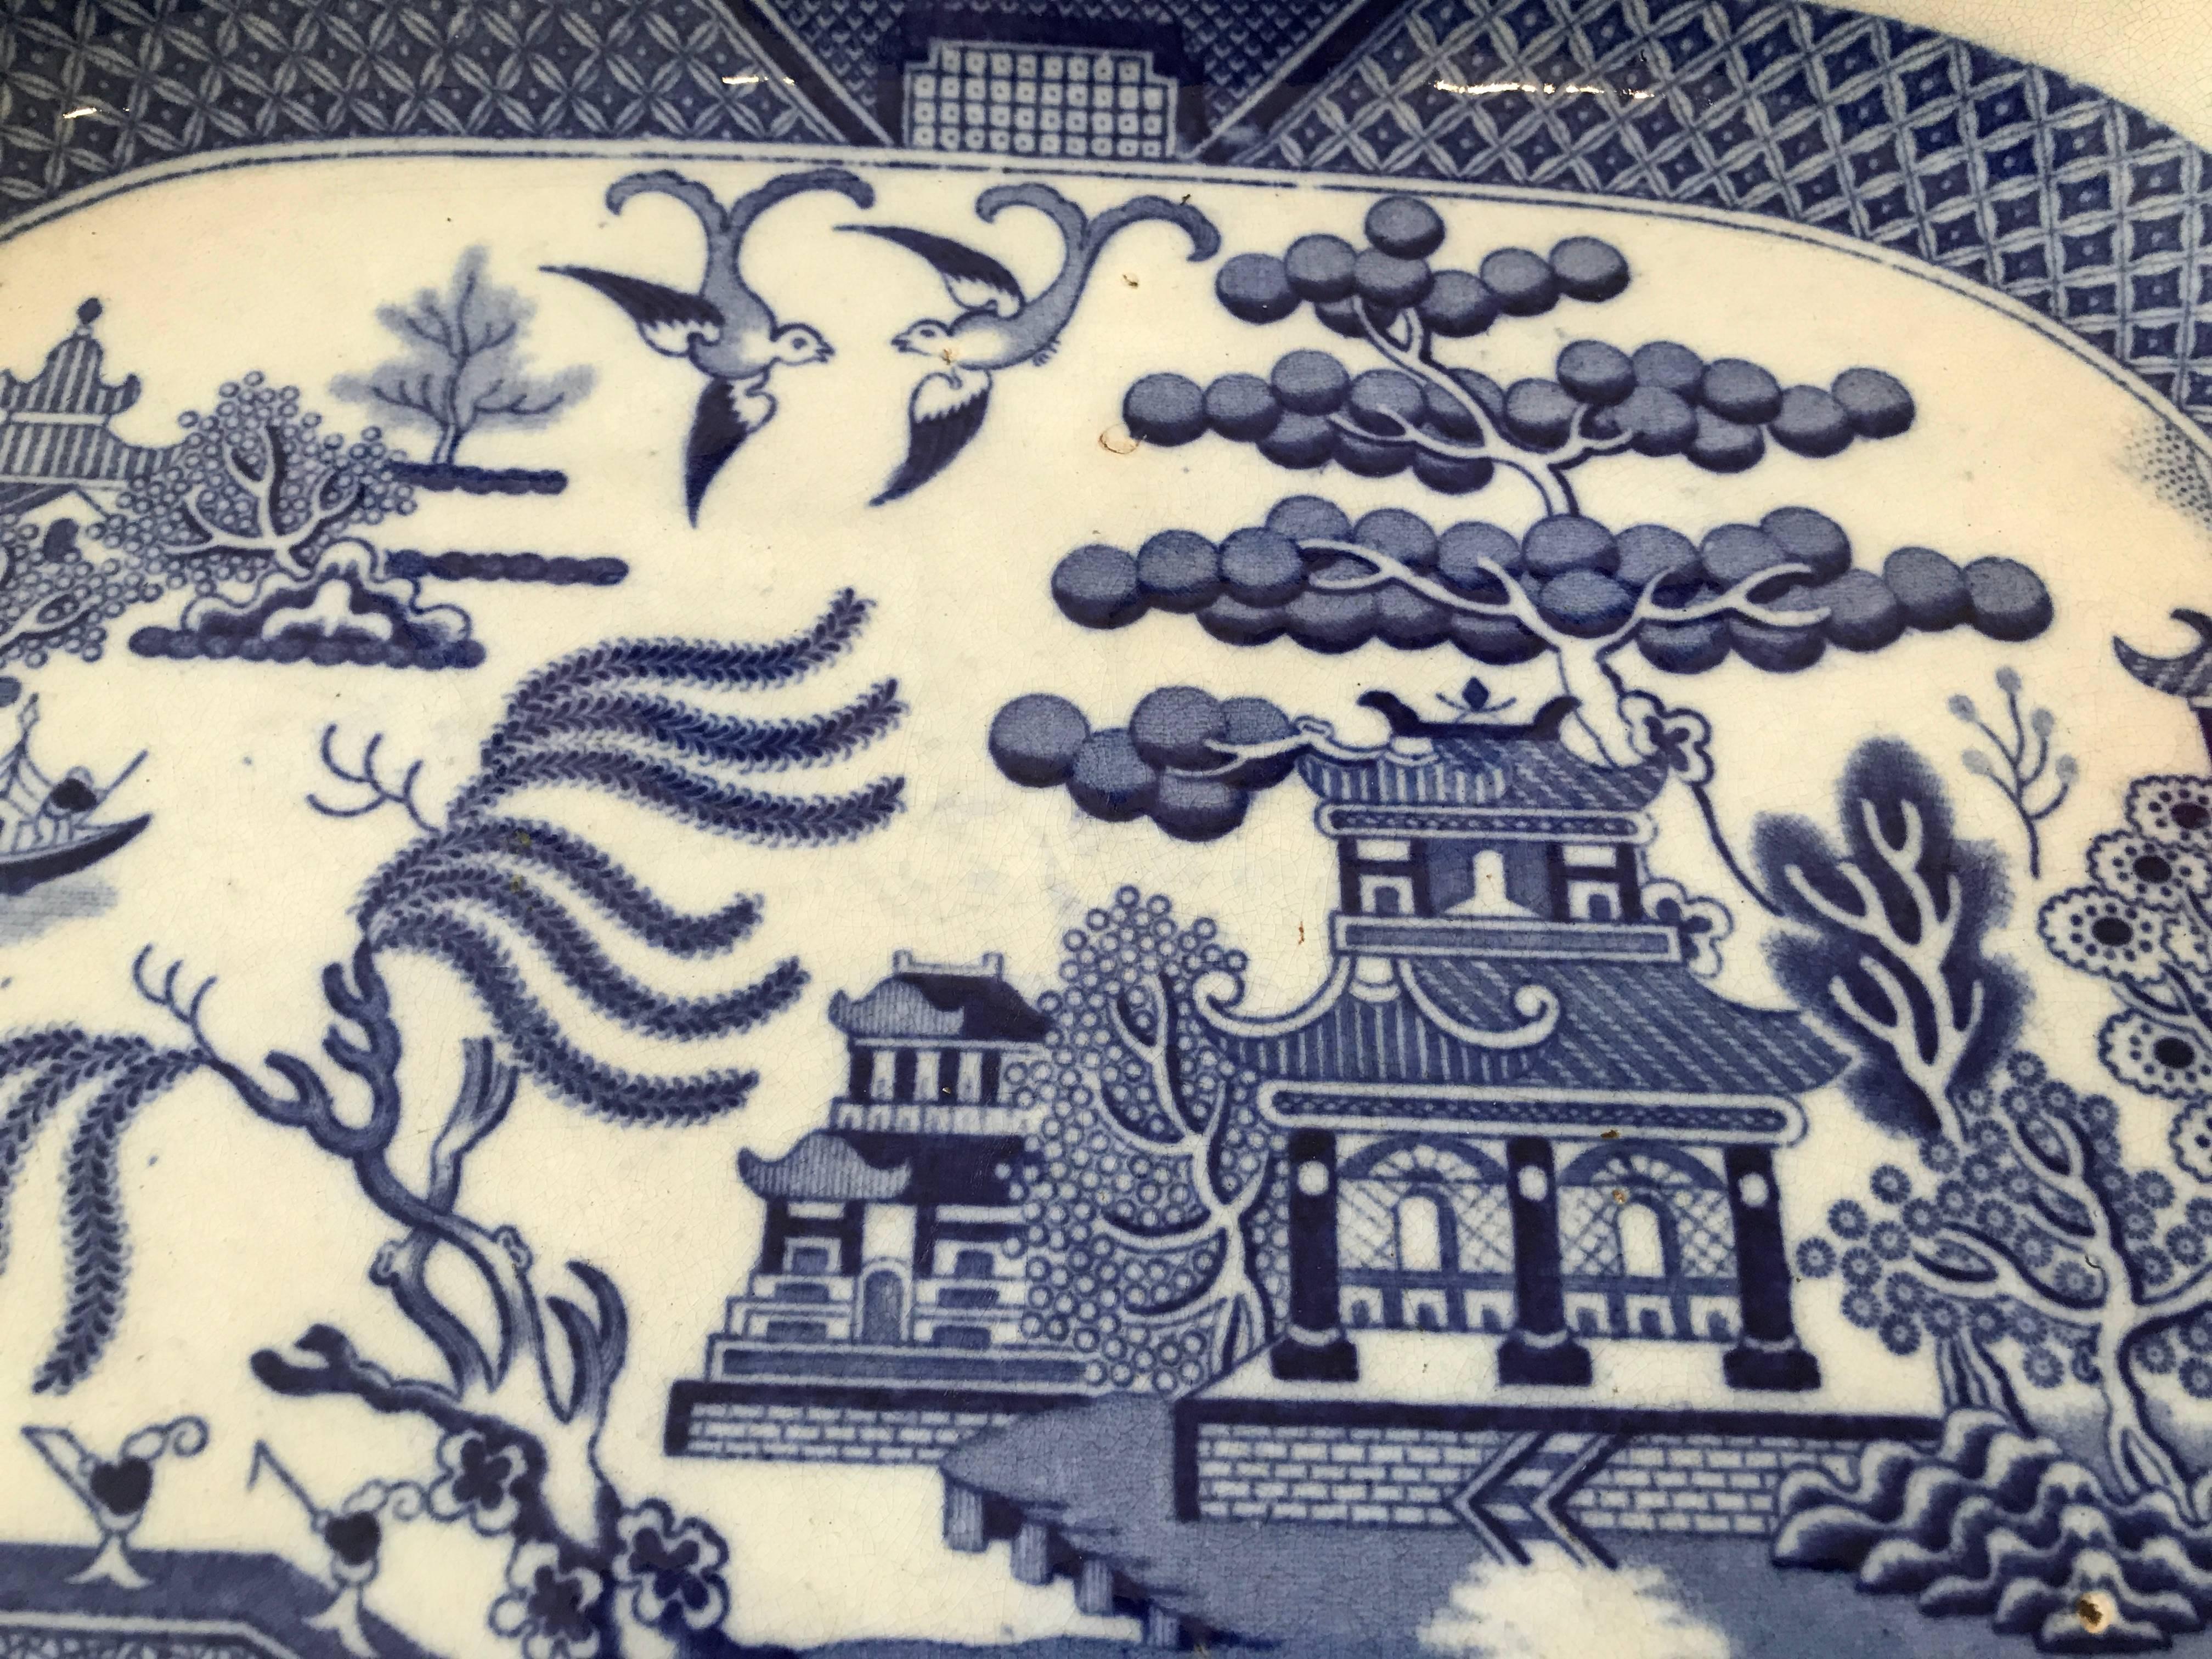 Add this to your blue and white collection of 19th century transferware. There are apparently no repairs or restoration, and the back of the platter confirms it’s age with signs of wear. The platter has been well enjoyed and can be used on a table